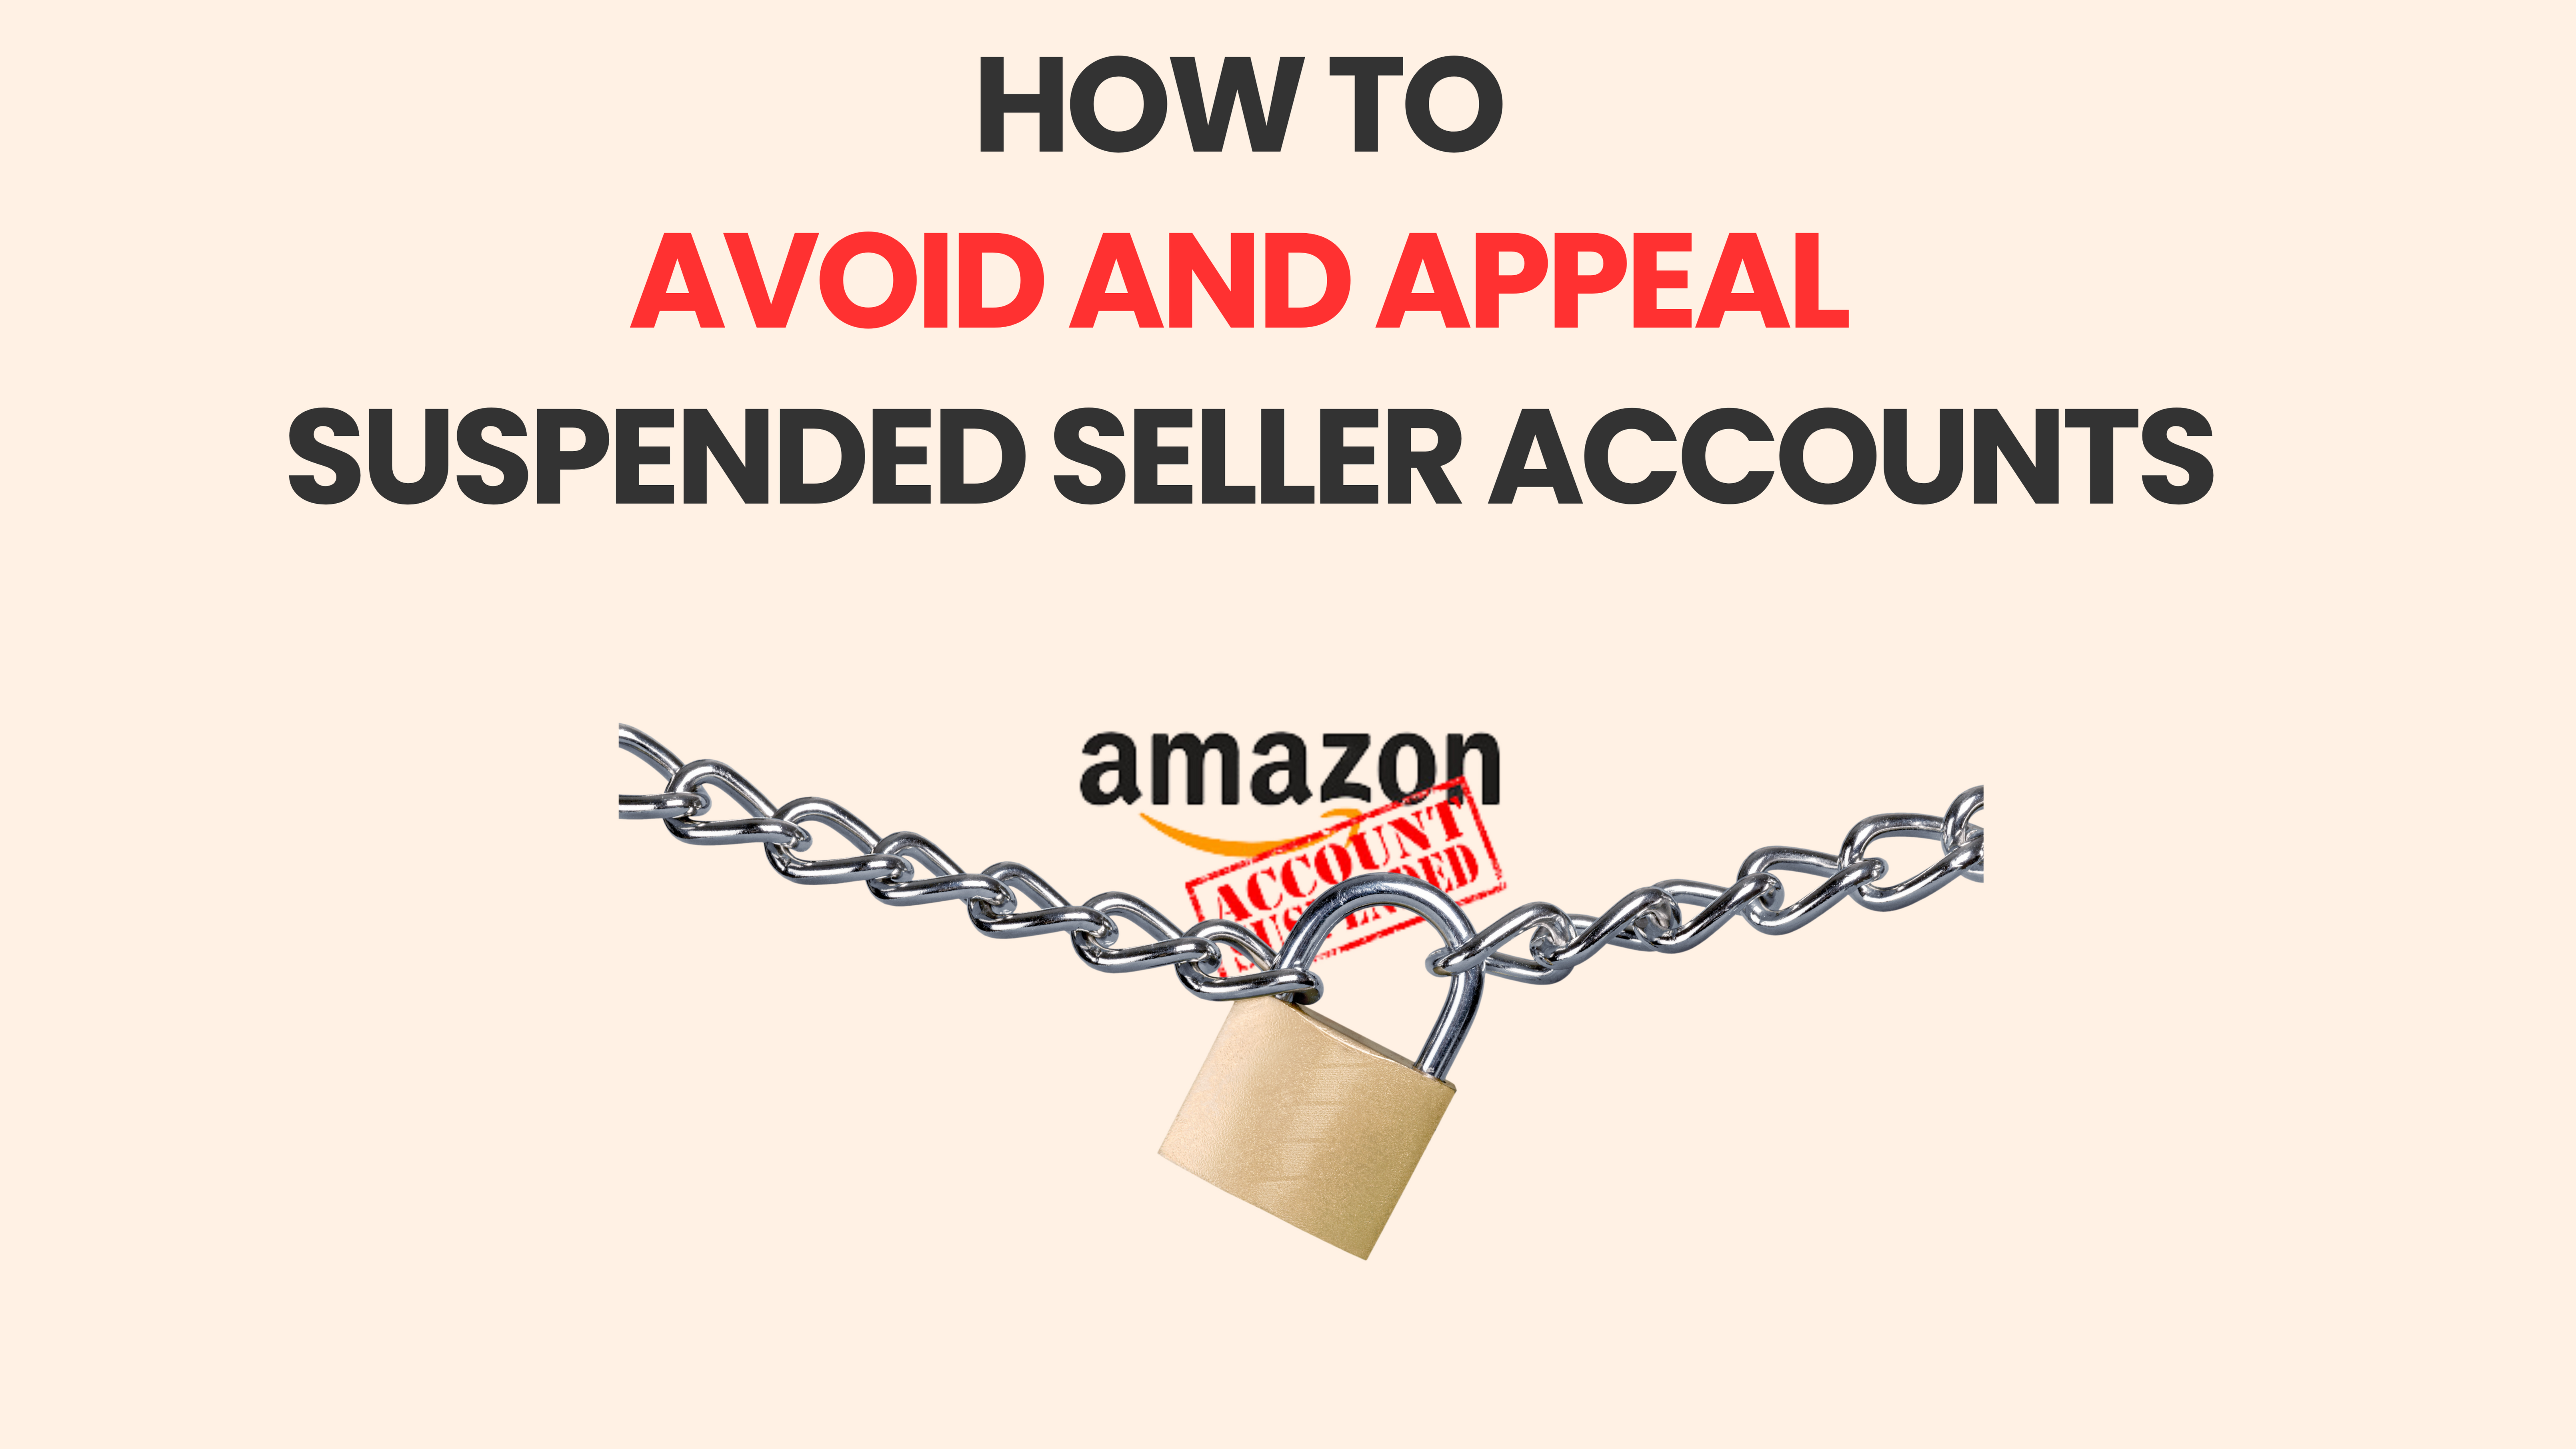 How to Avoid and Appeal Suspended Seller Accounts